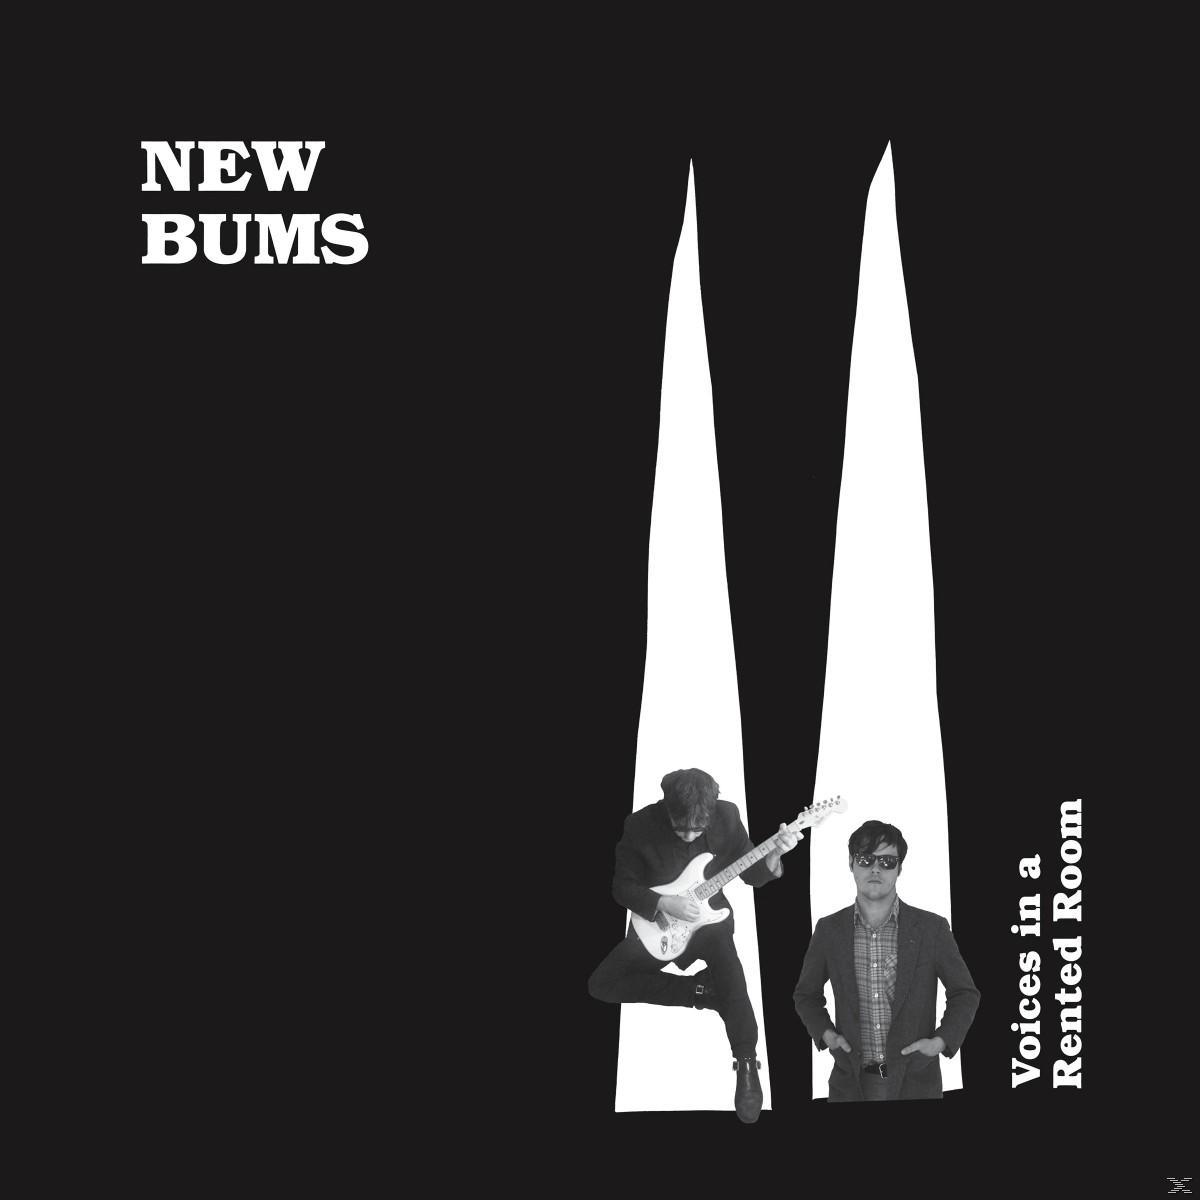 New Bums - Voices Rented In A Room (CD) 